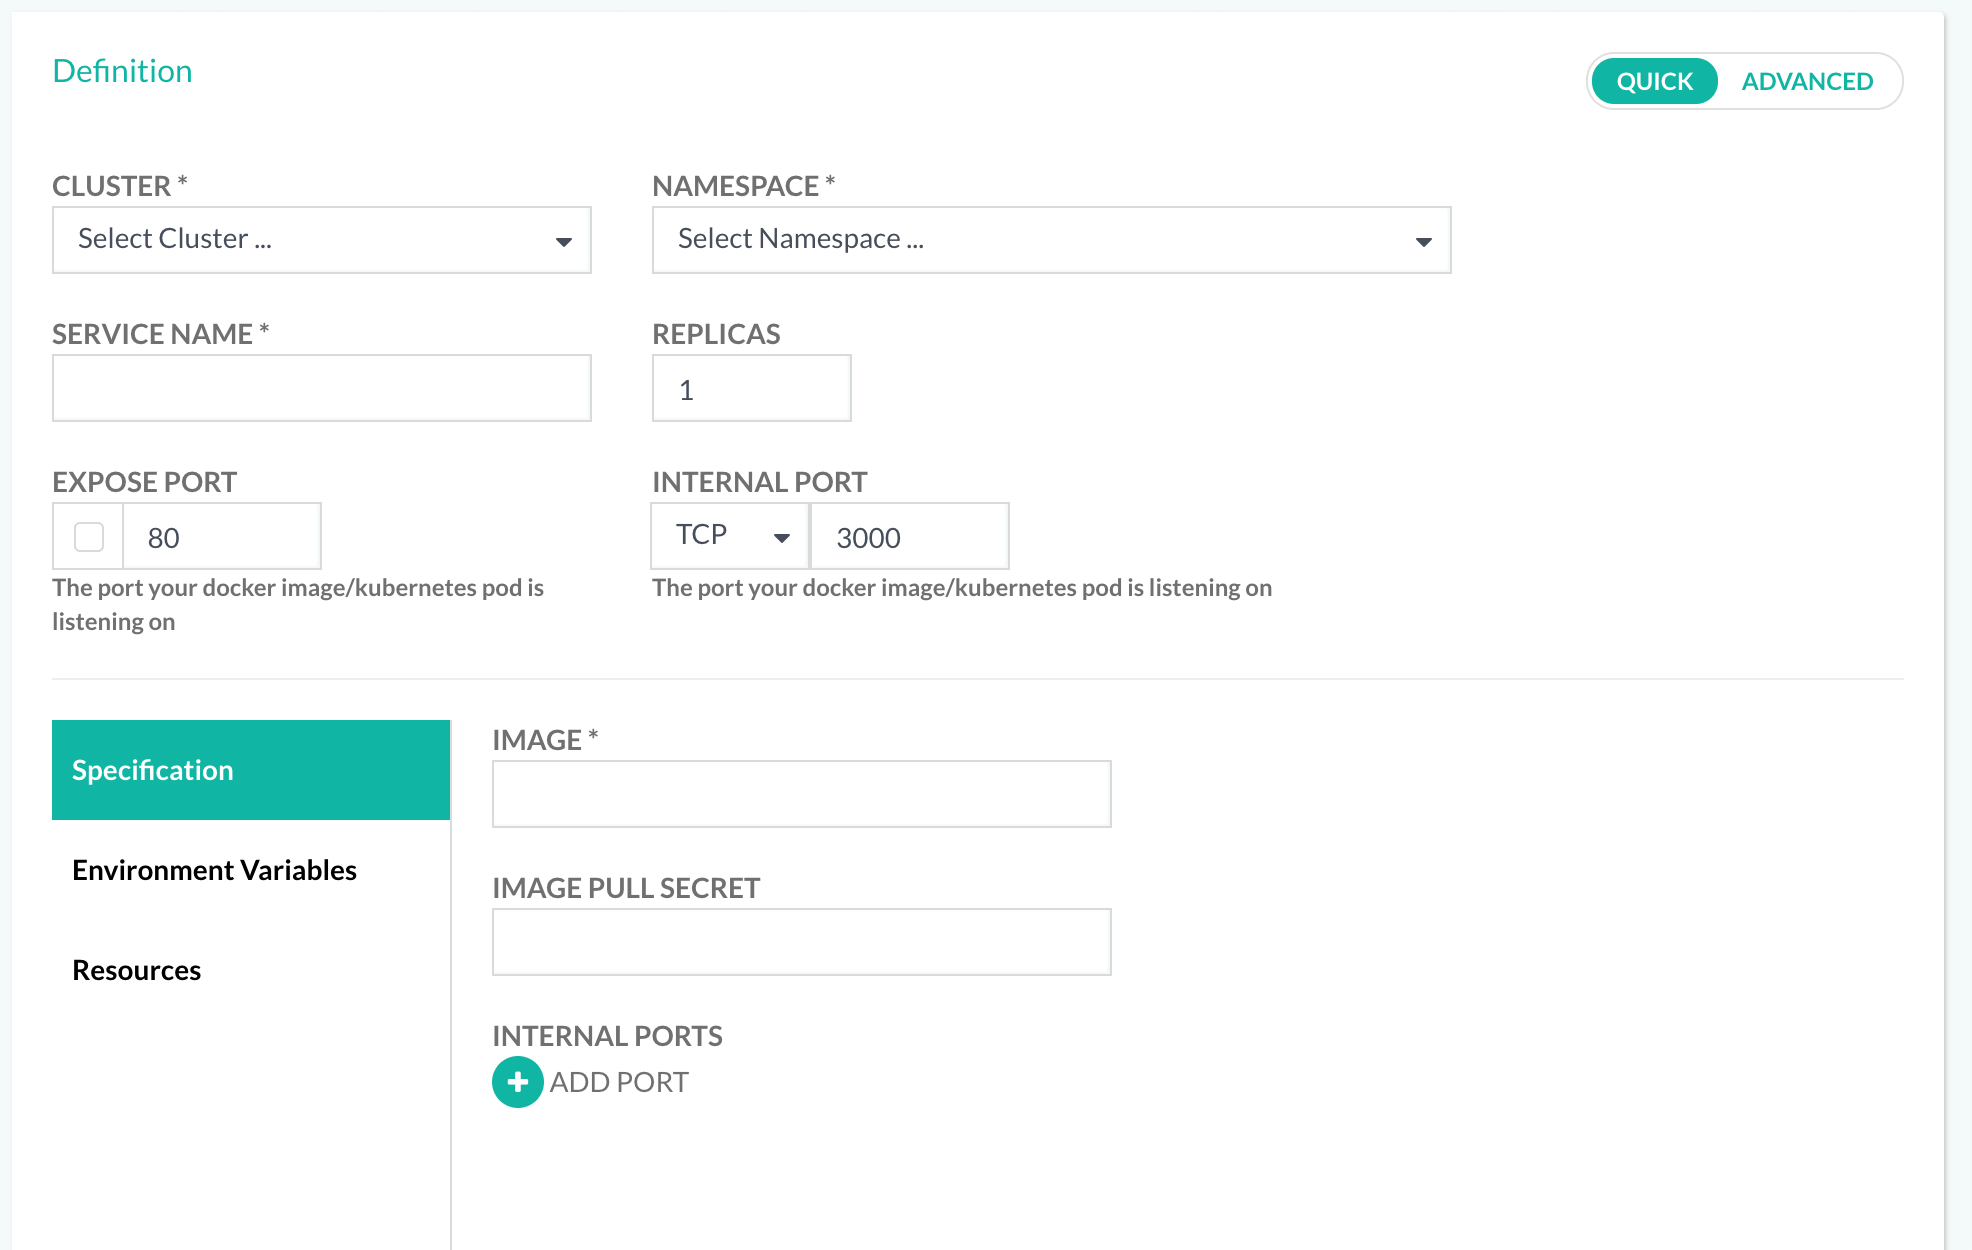 Deploying with the quick UI dialog